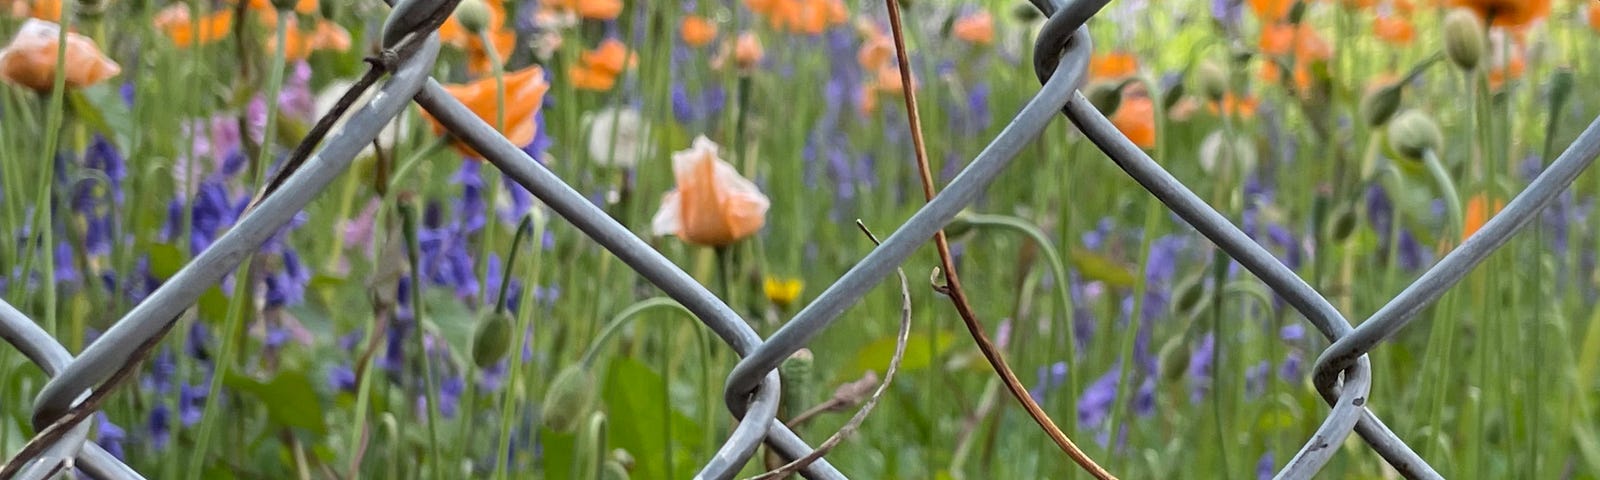 Photo of chain link fence and small meadow of poppies, grass and wildflowers with dry tendrils climbin up fence.